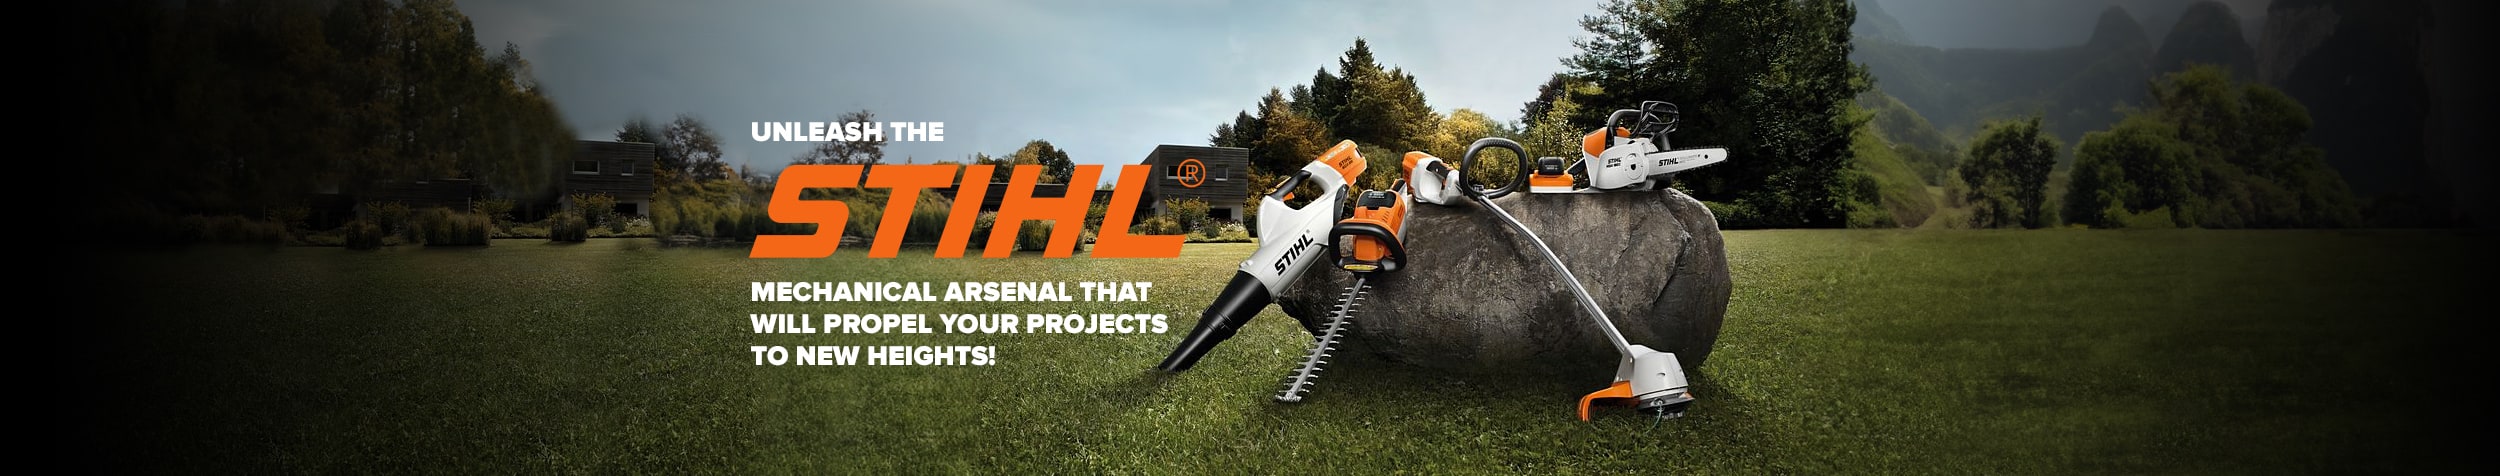 Unleash the STIHL mechanical arsenal that will propel your projects to new heights!